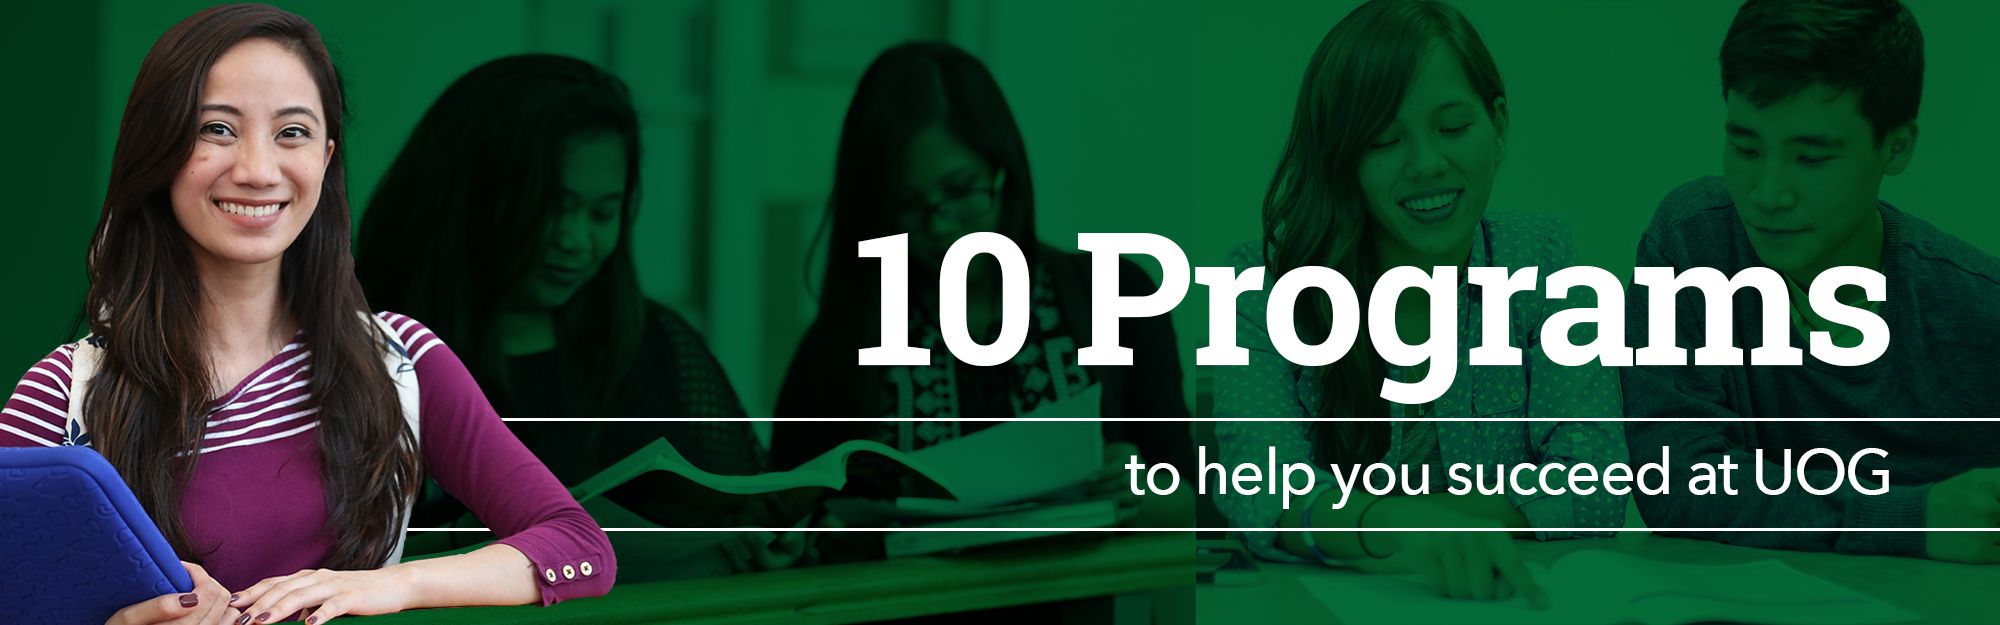 10 Programs to help you succeed at UOG